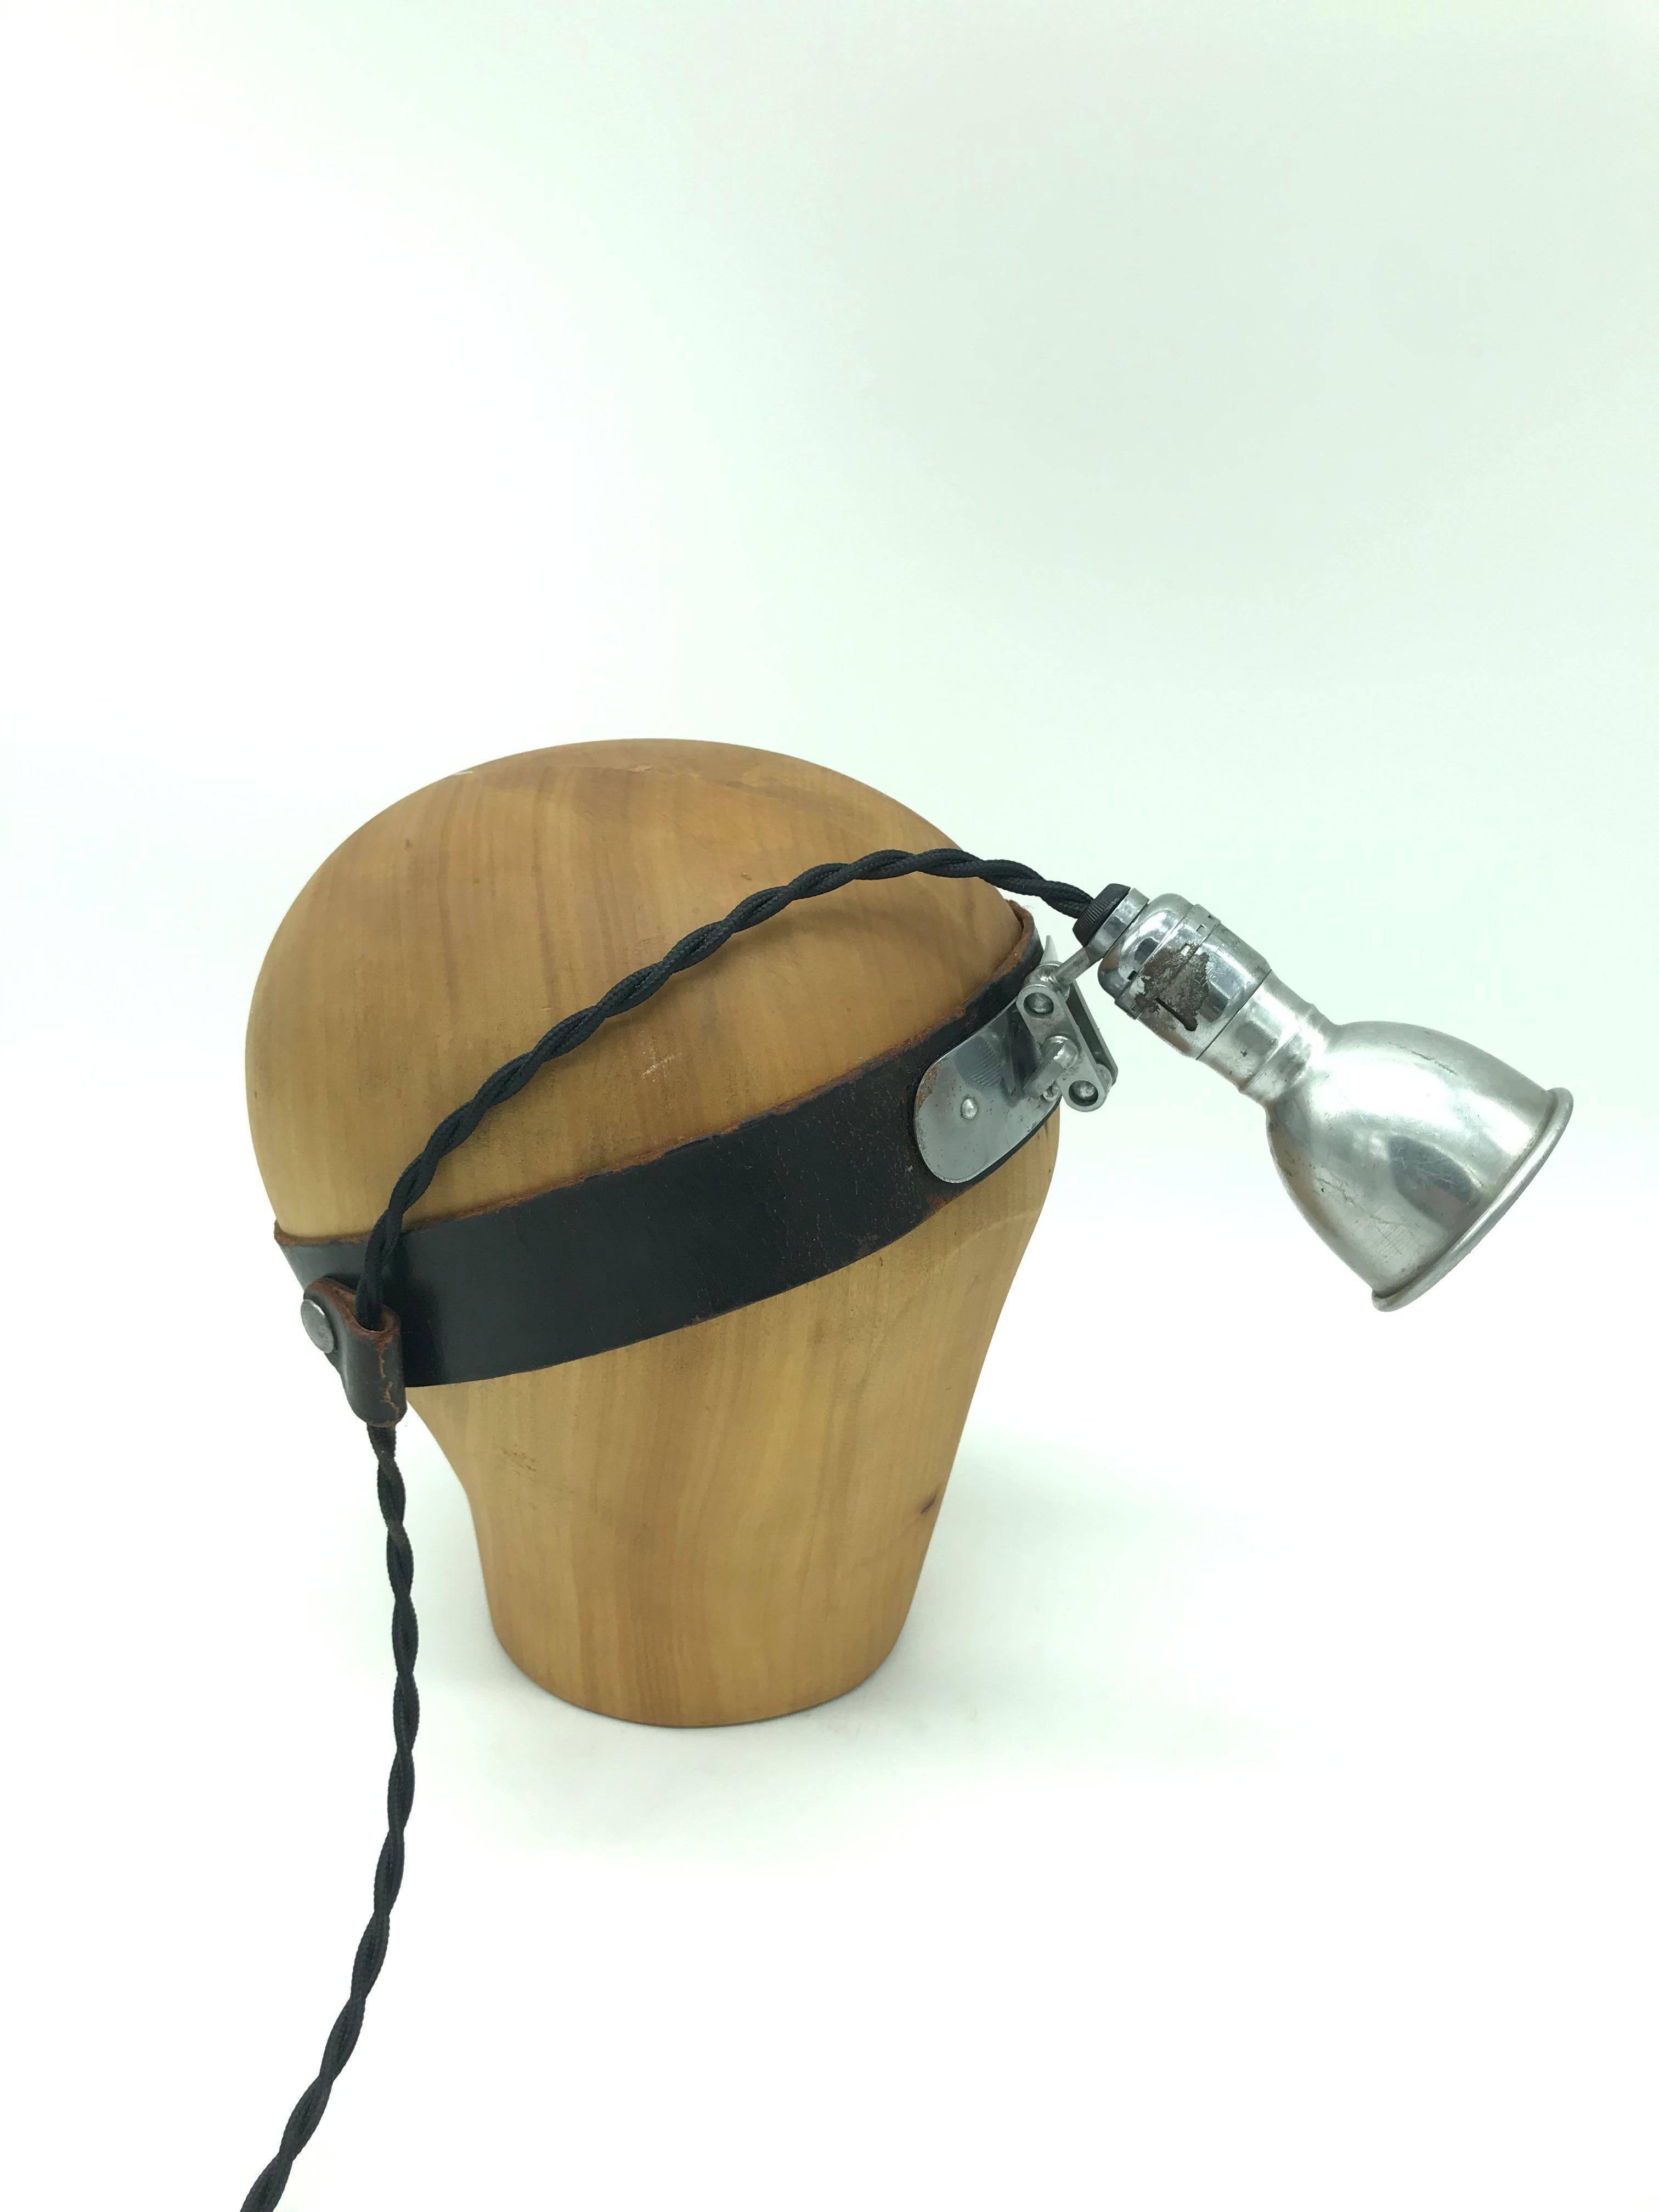 Vintage medical head stand table lamp.
Made from a vintage wooden hat or wig stand and mounted with an antique medical inspection lamp
A cool table lamp like no other
The medical lamp has a small 6 cm aluminum pressed shade and with a carbon